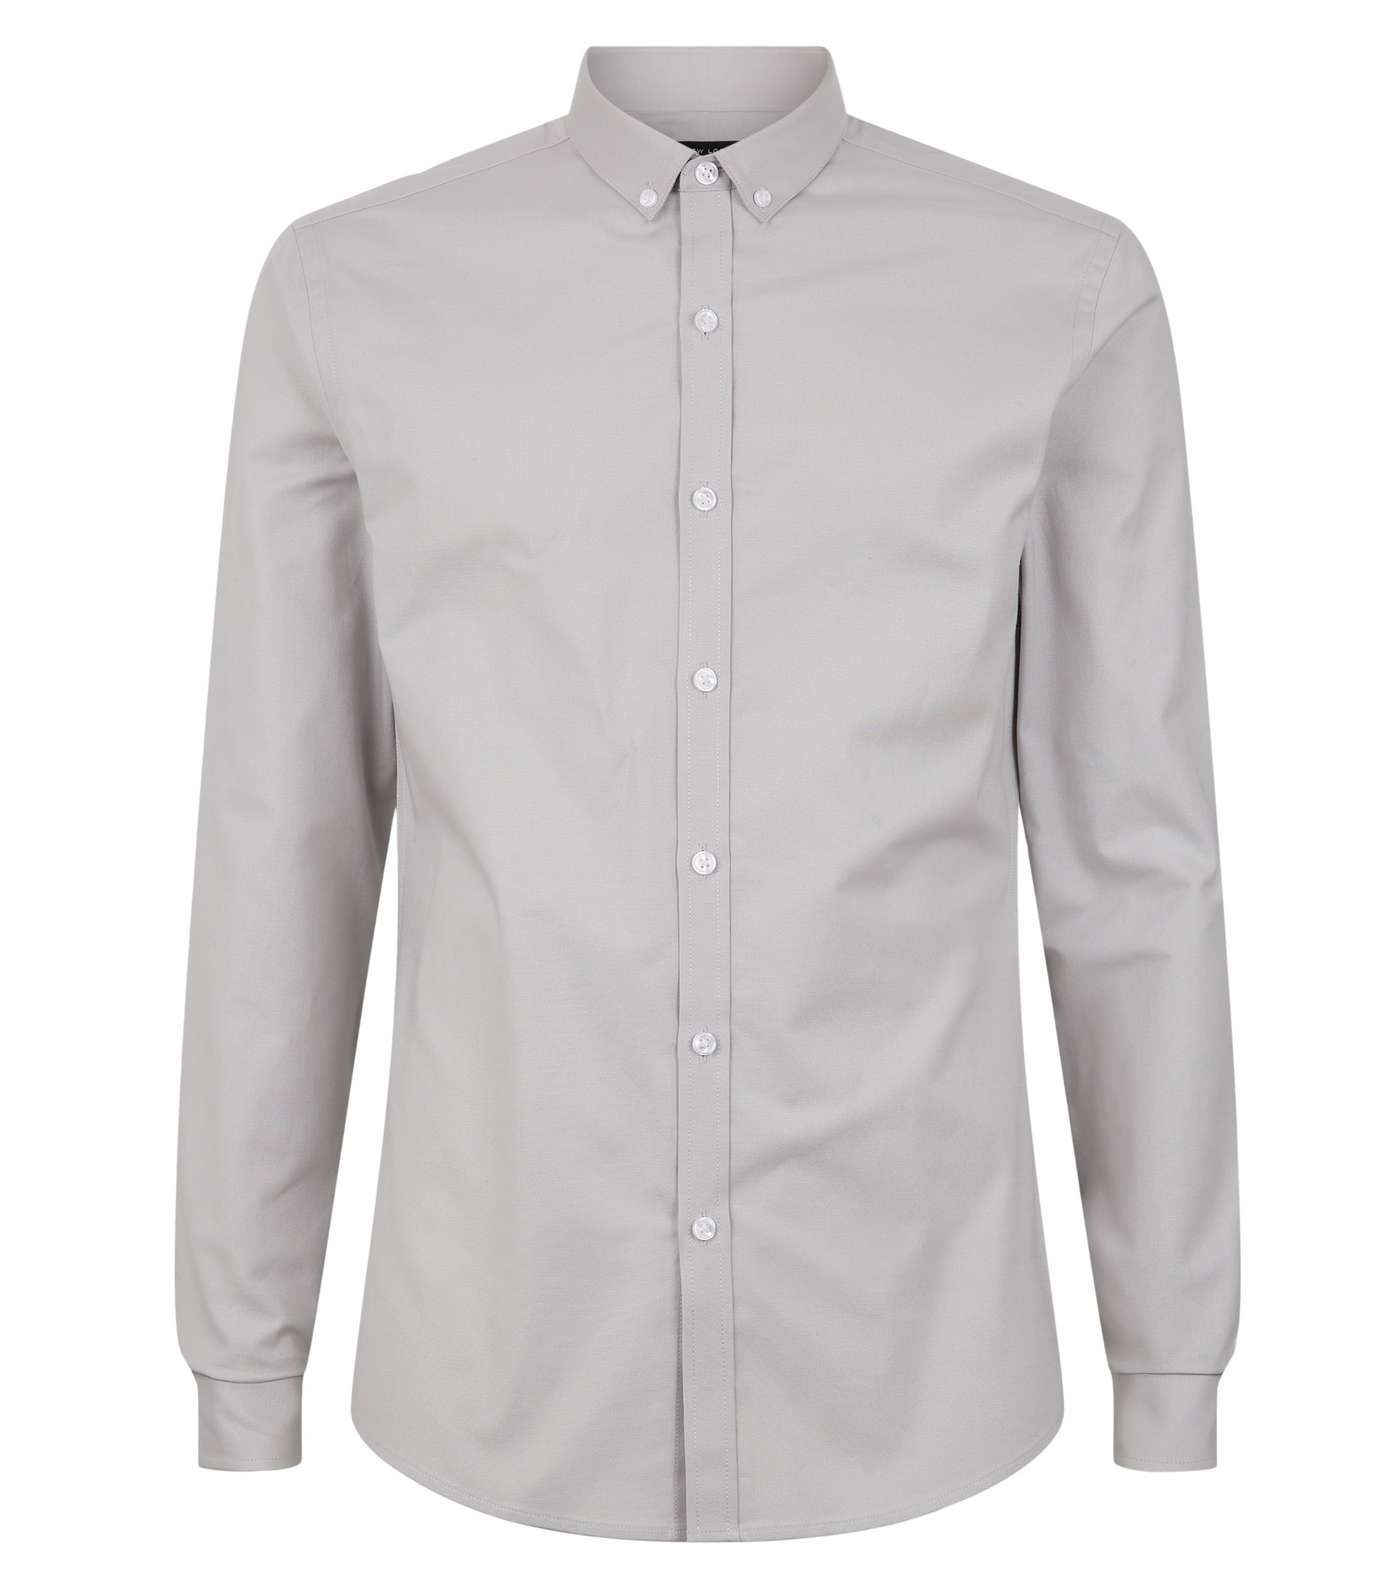 Pale Grey Muscle Fit Long Sleeve Oxford Shirt Image 4